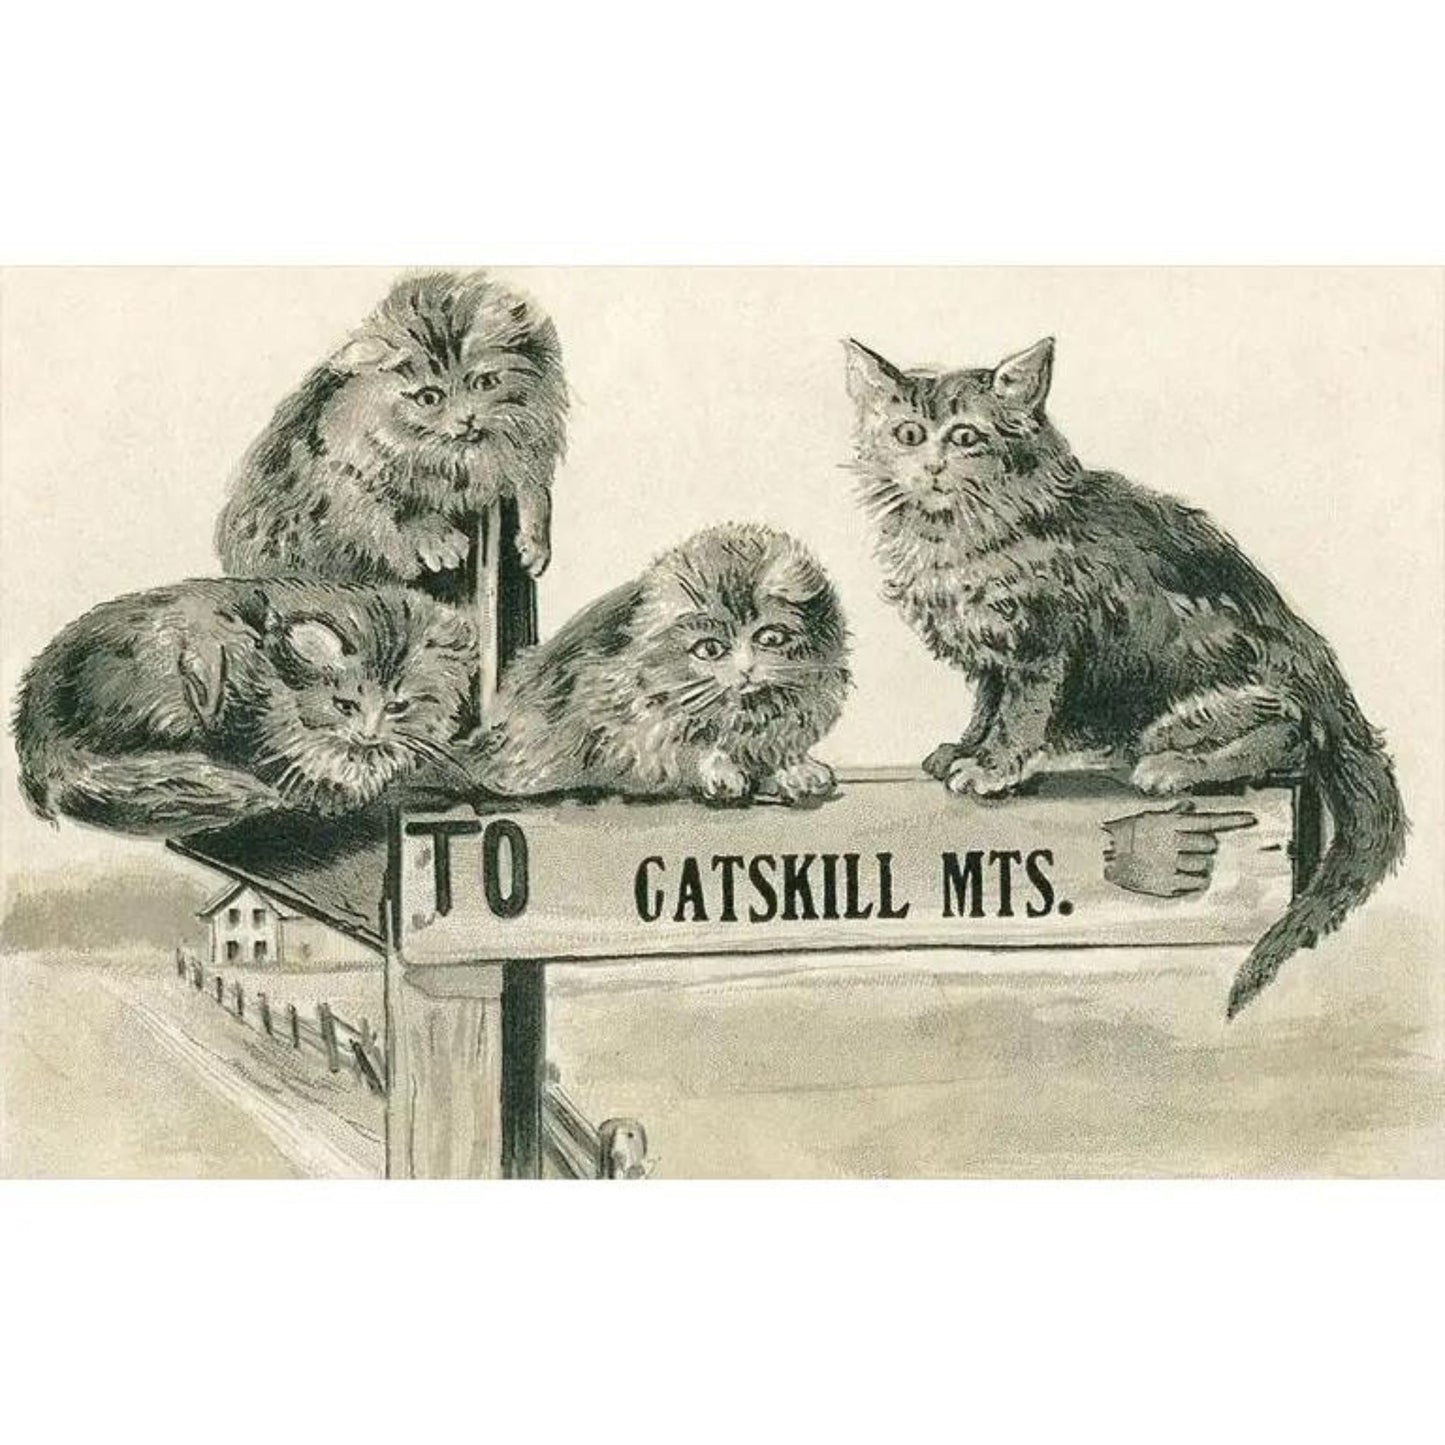 Vintage postcard with 4 cats sitting on a sign that says "to Catskill Mts."